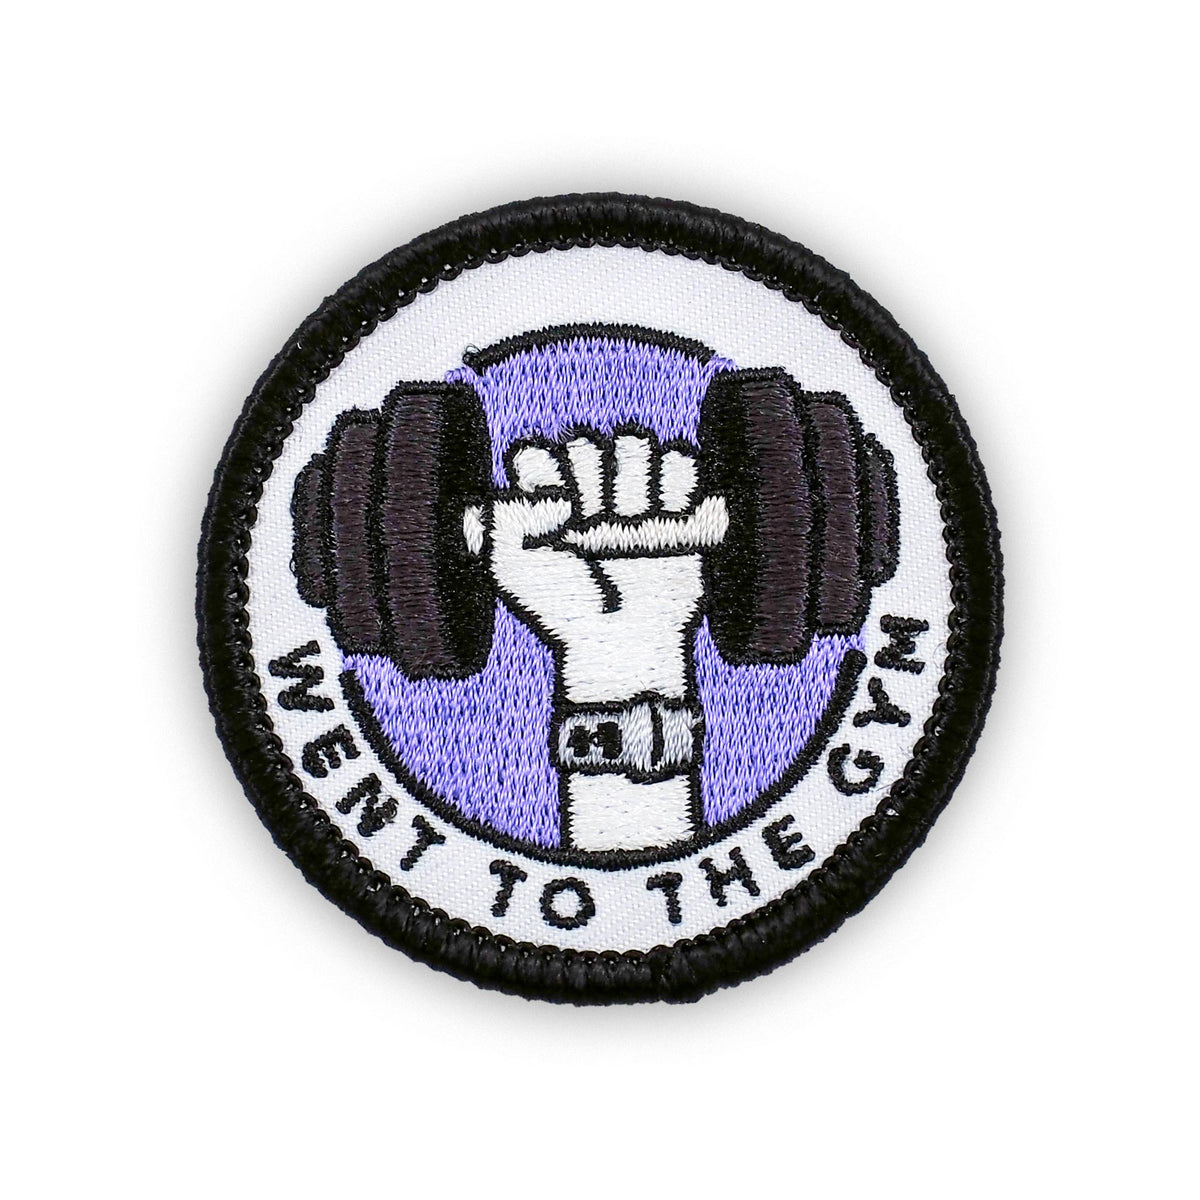 Went To The Gym individual adulting merit badge patch for adults